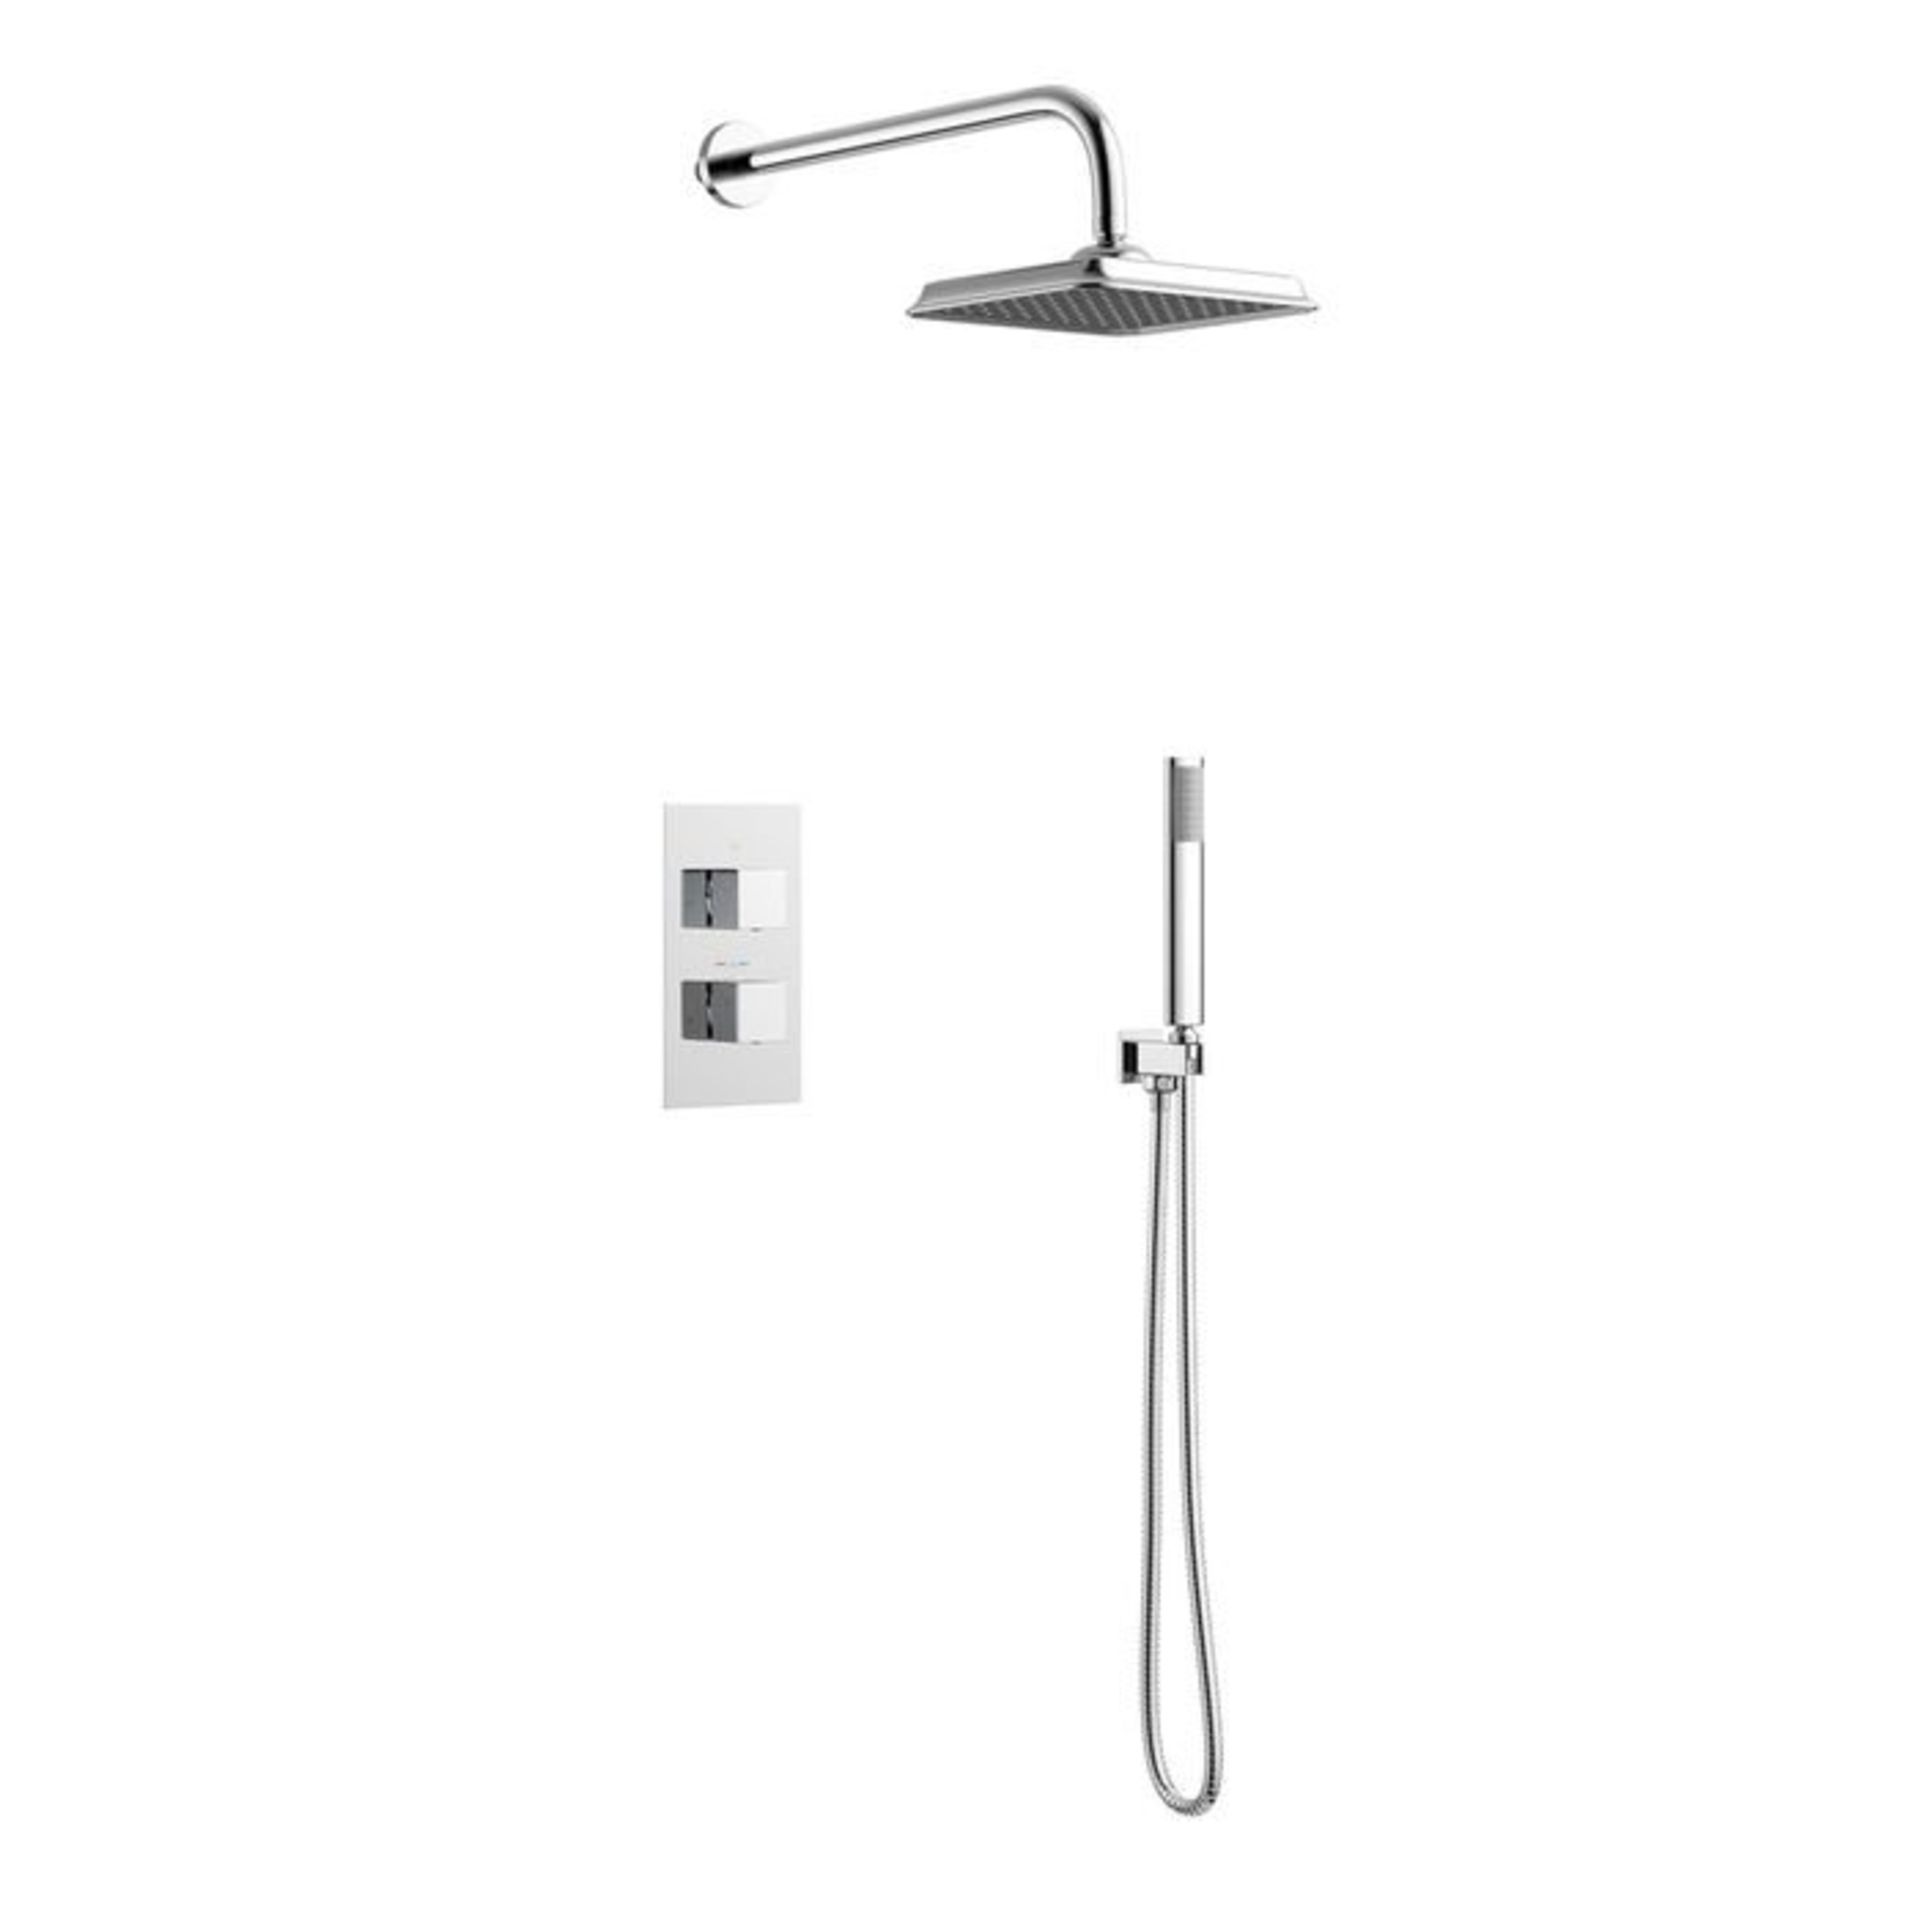 (S12)Square Concealed Thermostatic Mixer Show Kit & Medium Head . Enjoy the minimalistic aesthetic - Image 4 of 5